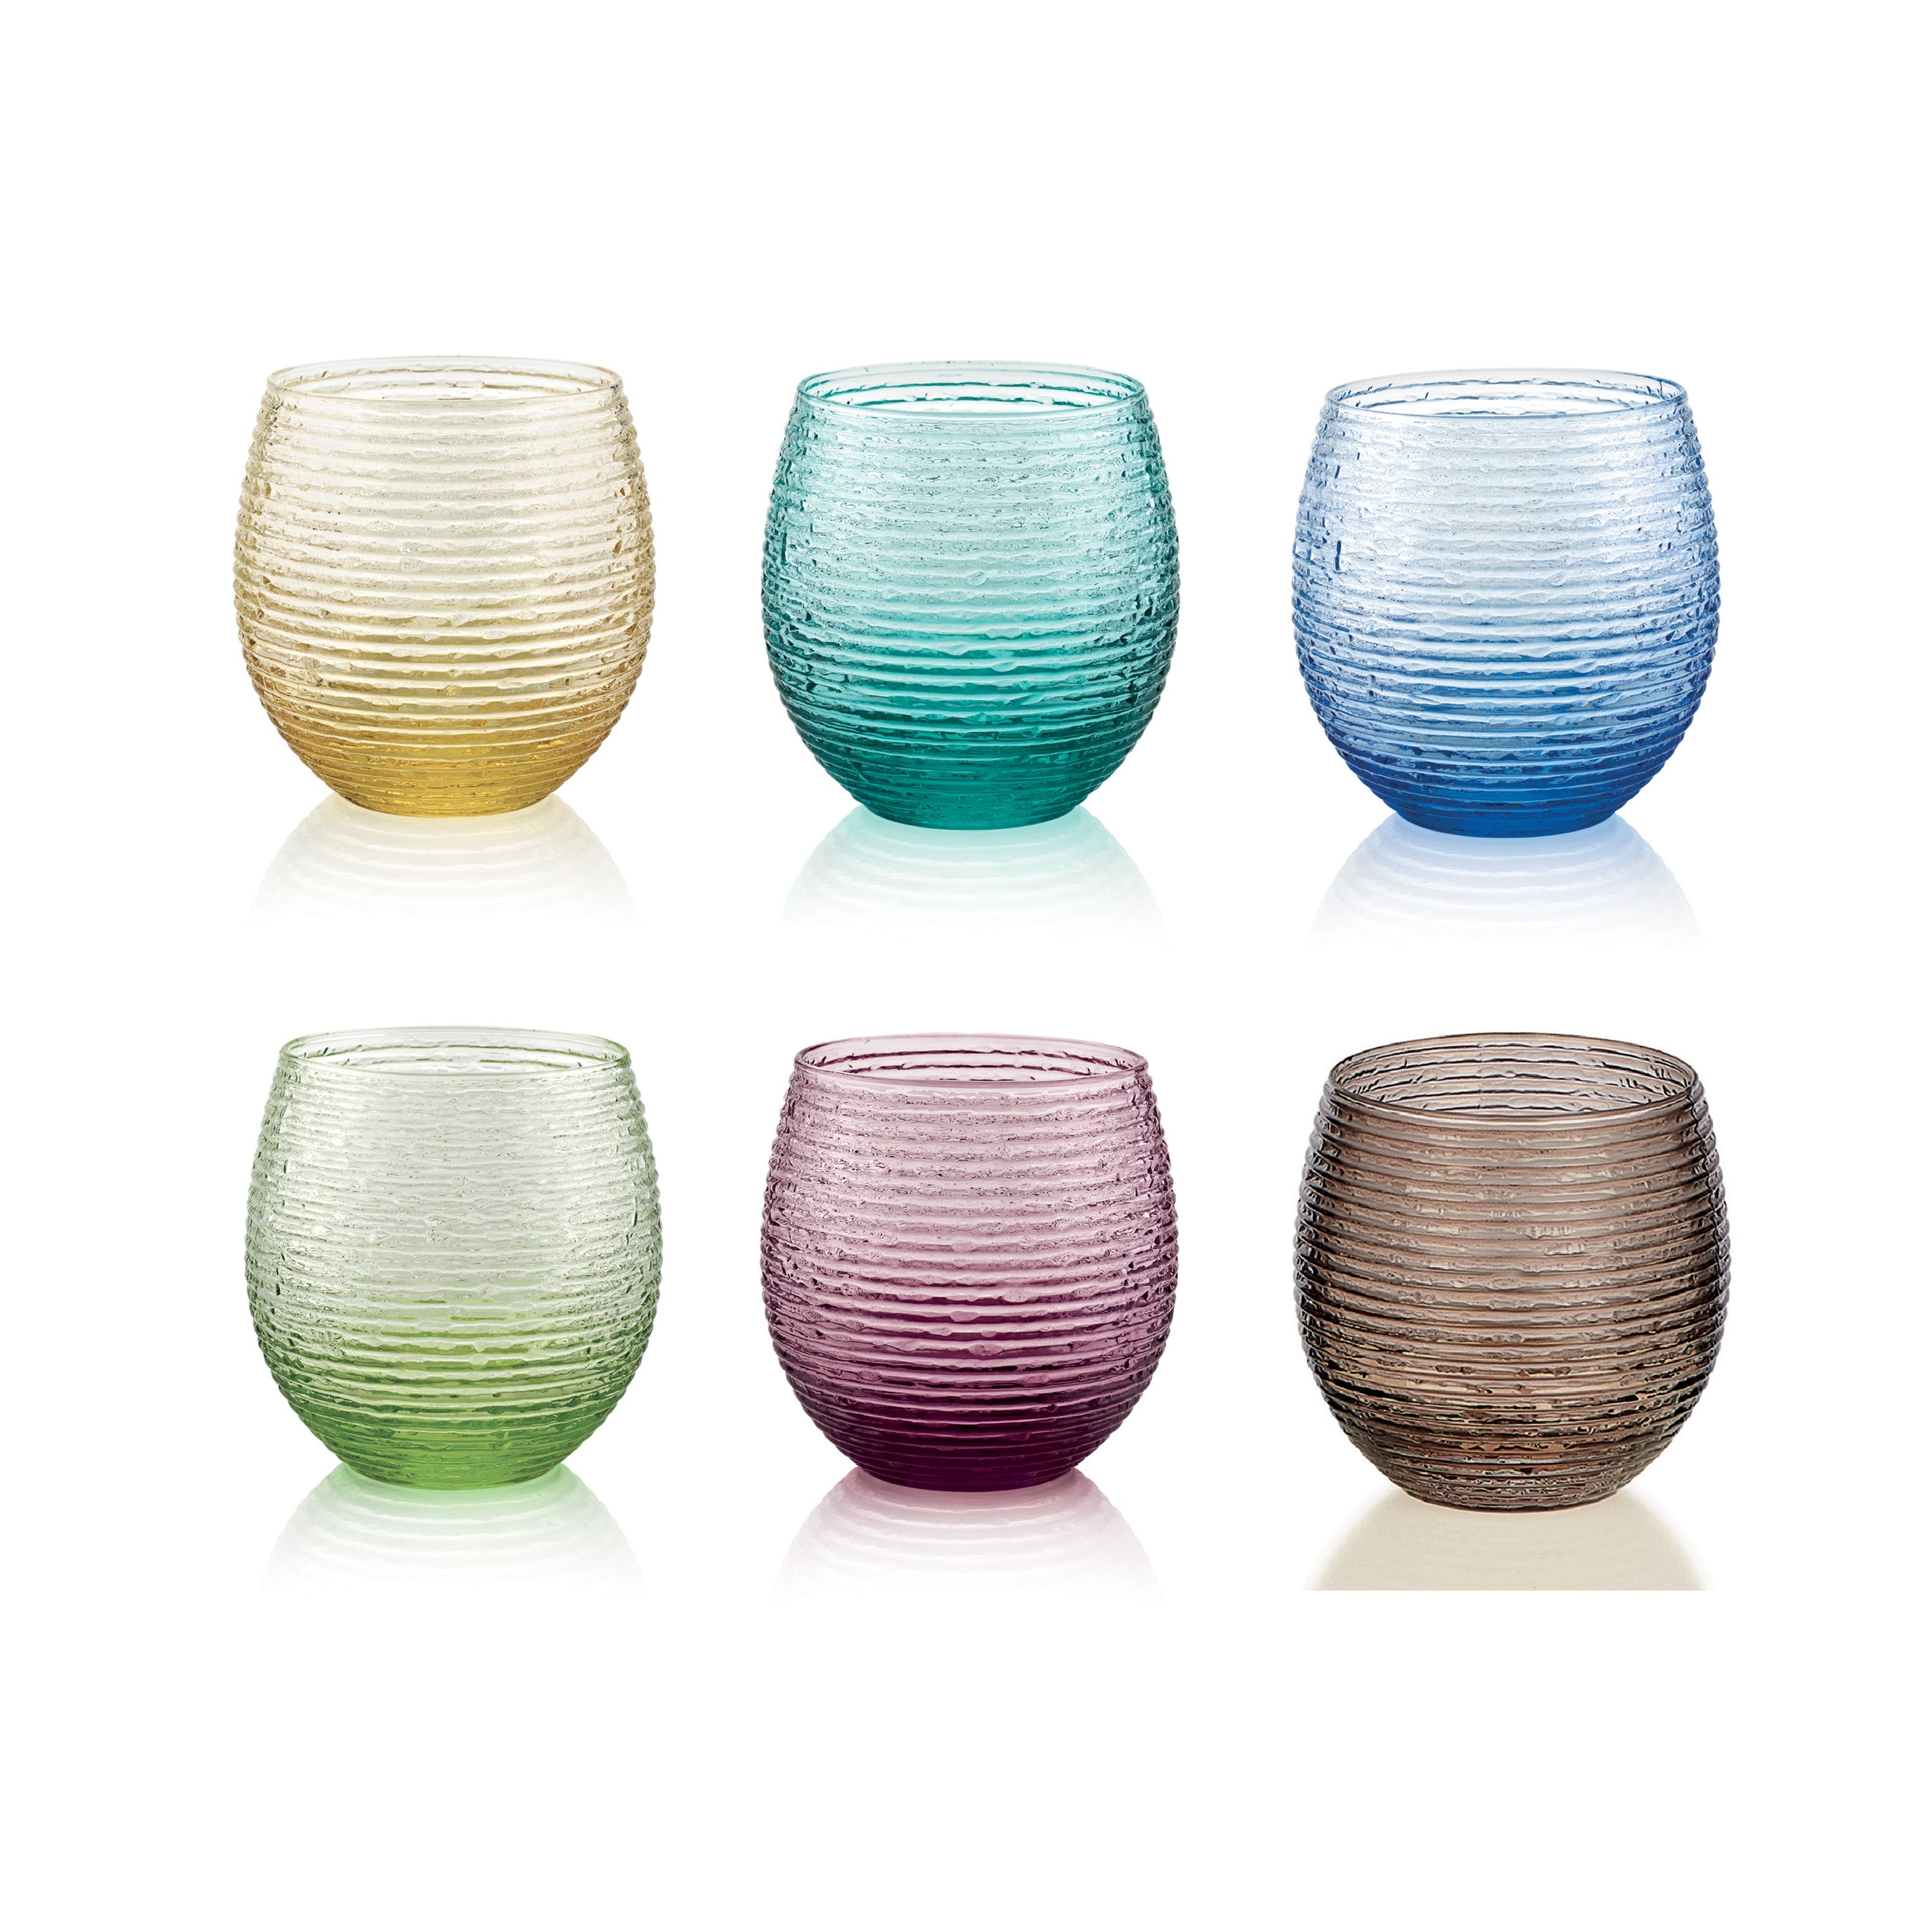 IVV Multicolor Set 6 Water Glasses assorted colors, cl 25